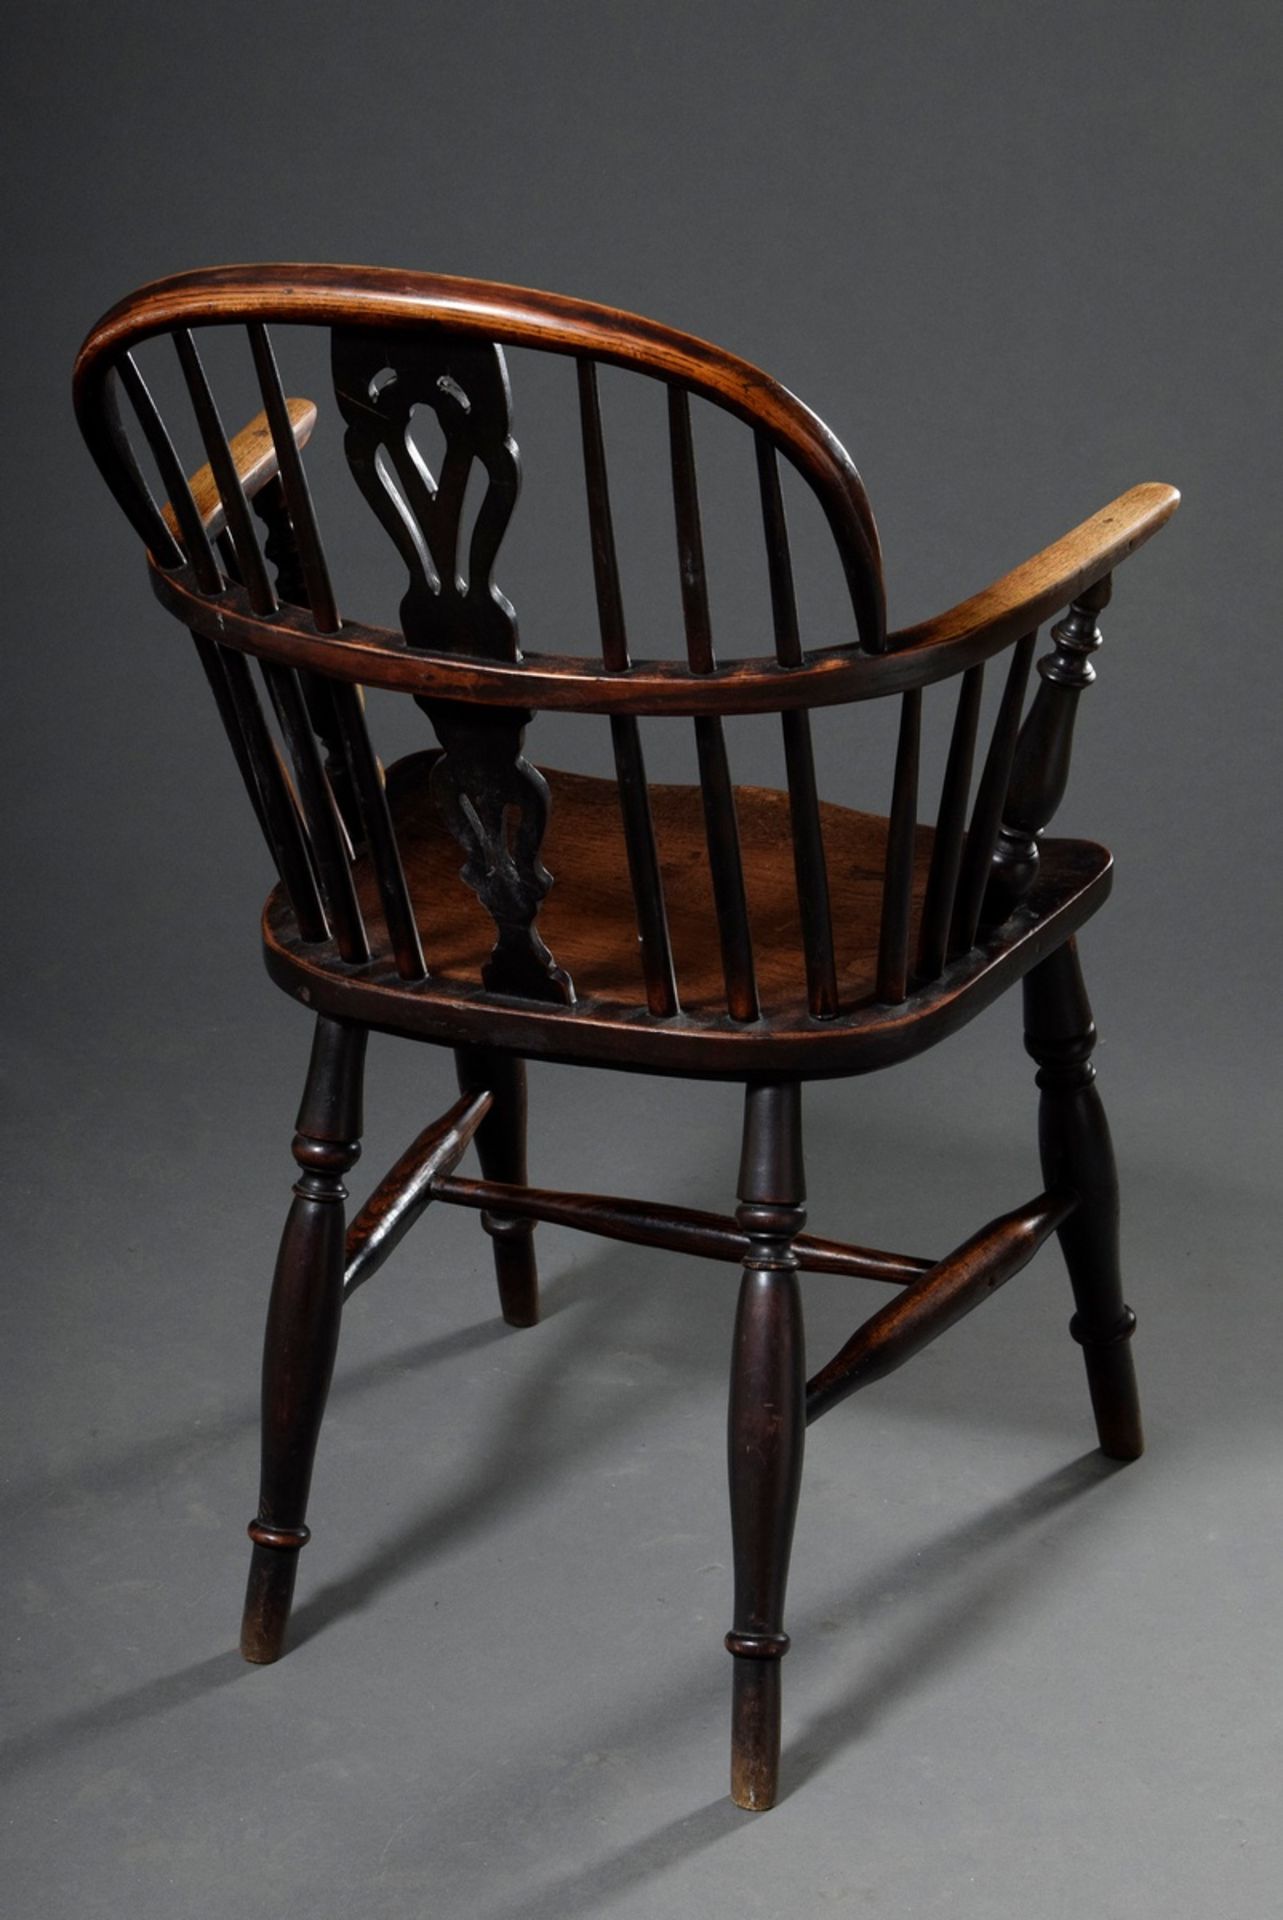 Pair of Windsor Chairs, elm stained, h. 45/89 u. 92, signs of age and use - Image 4 of 6